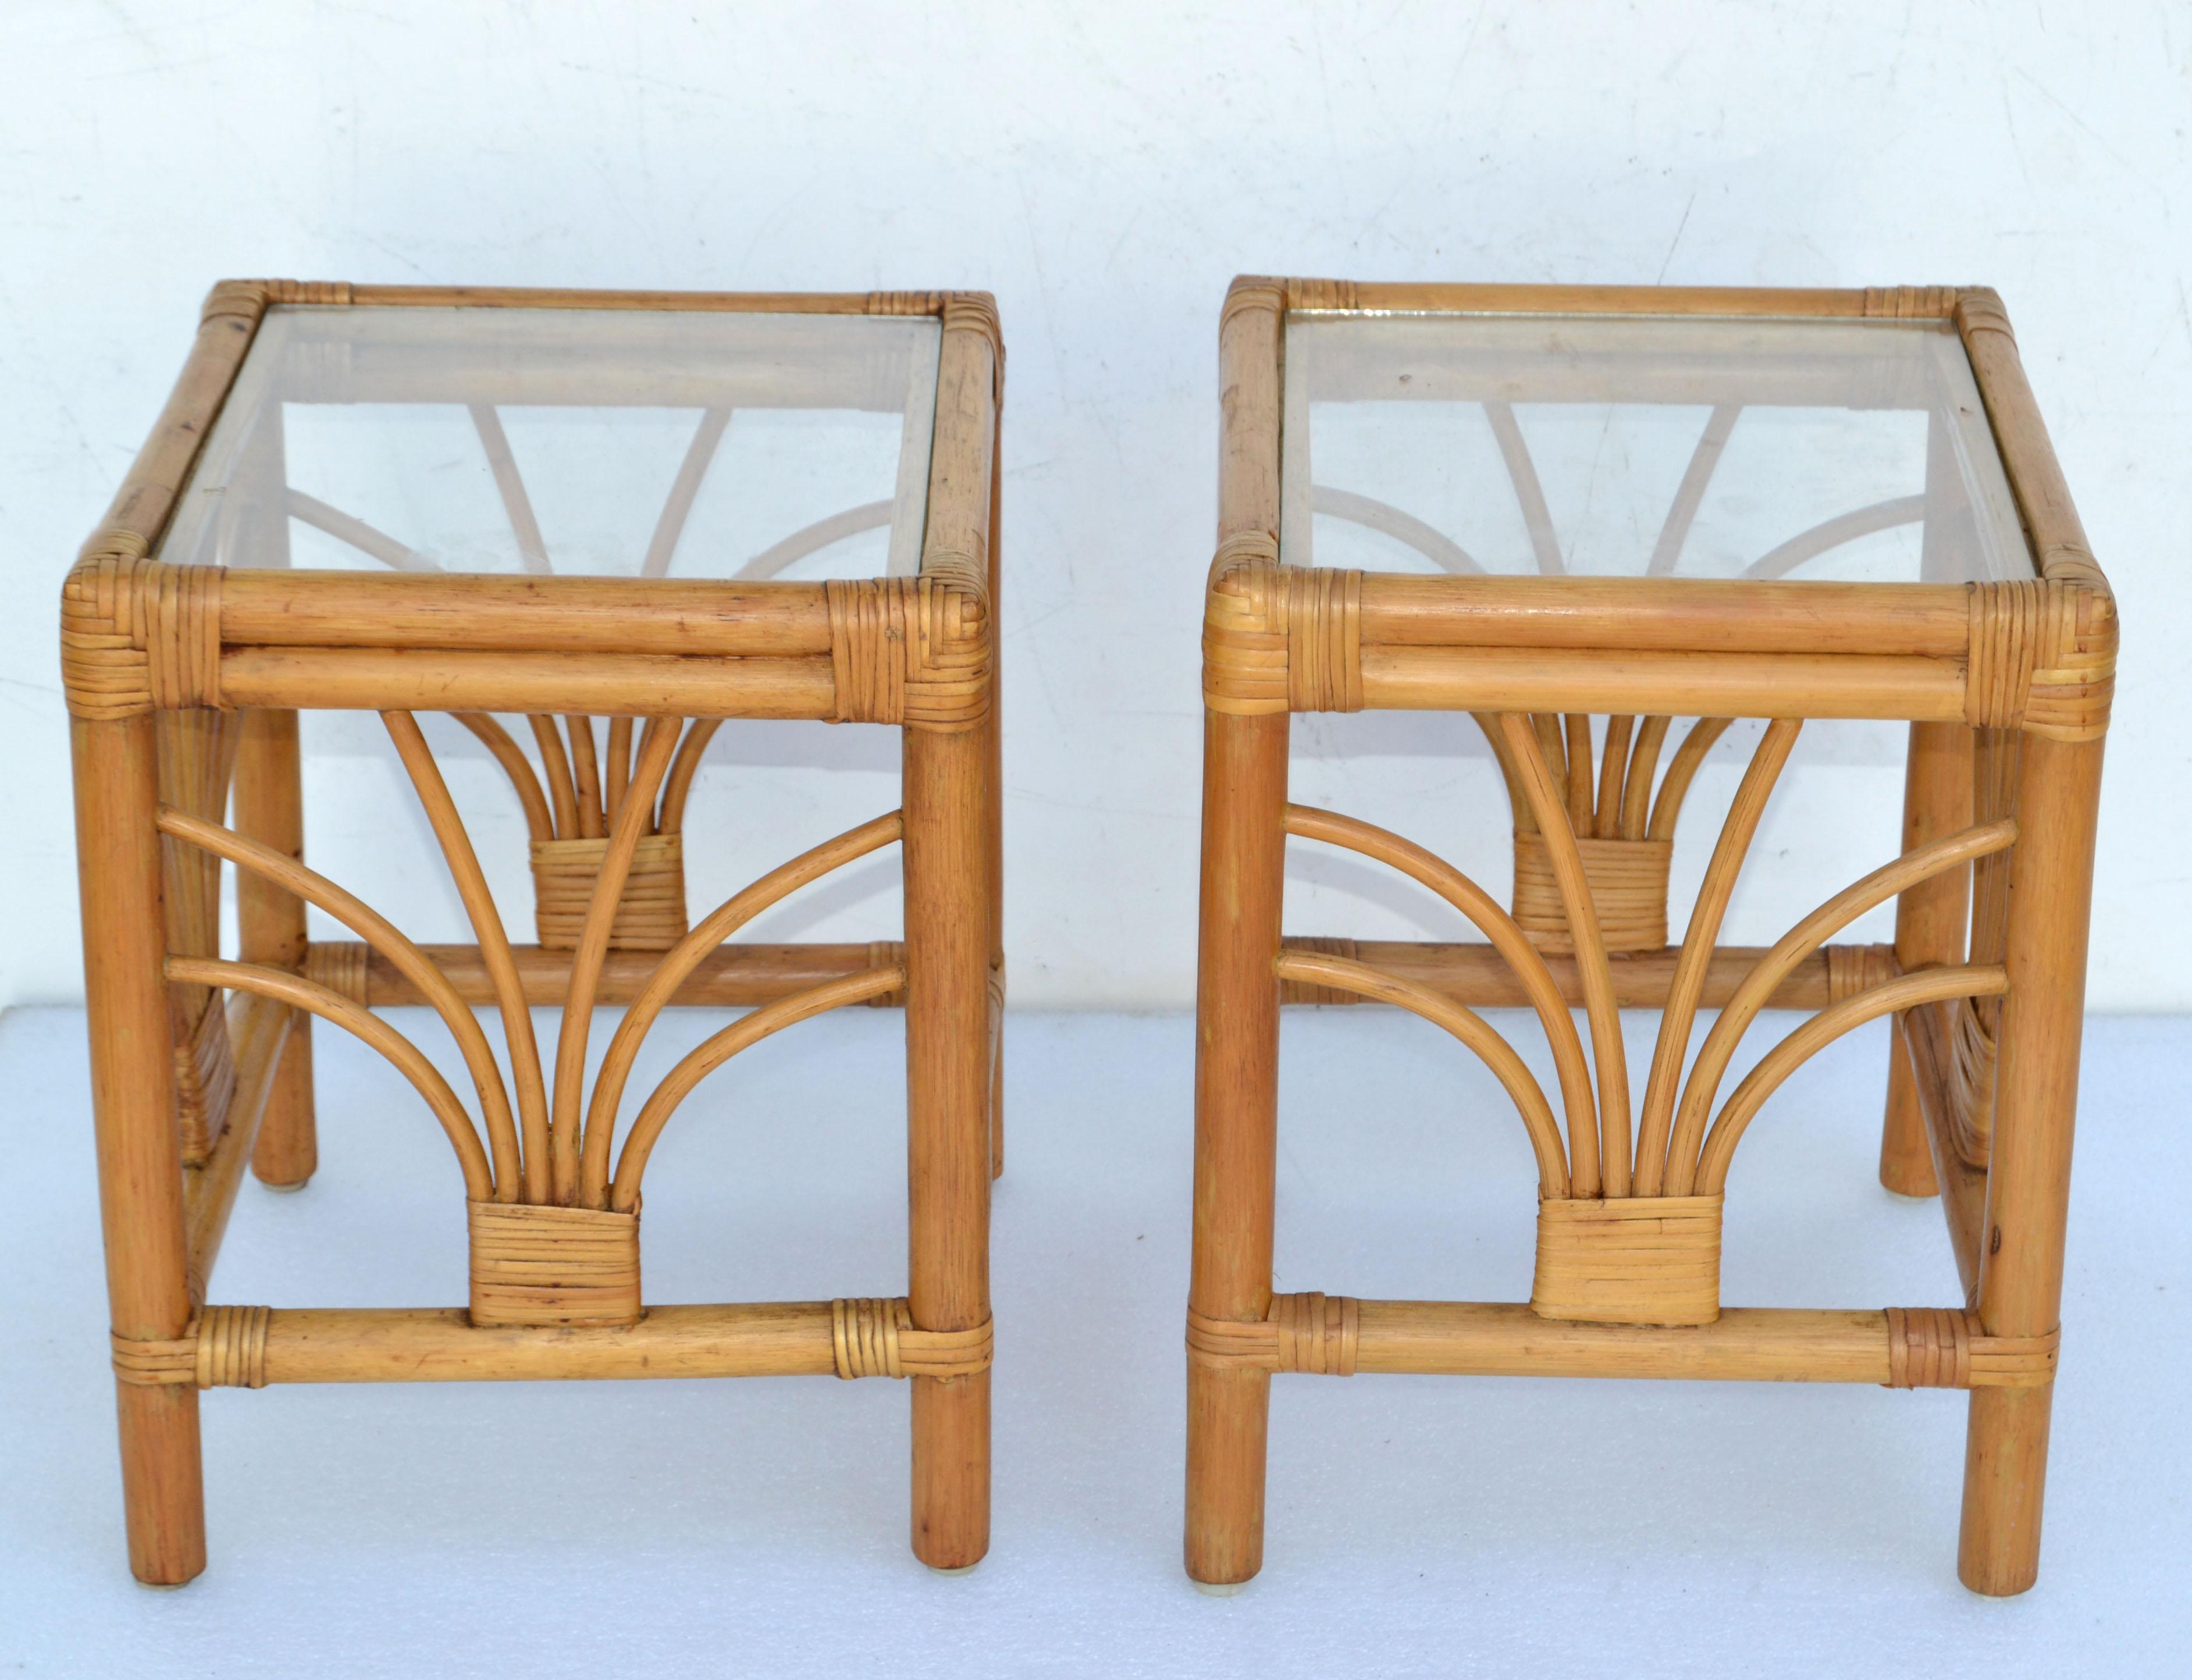 We offer a pair of Vintage handmade bamboo, reed & cane side or end tables with glass tops.
Great for your Florida sun room.
Bohemian Style made in America in the late 1970.
Very good condition and the Glass Tops are newly made.